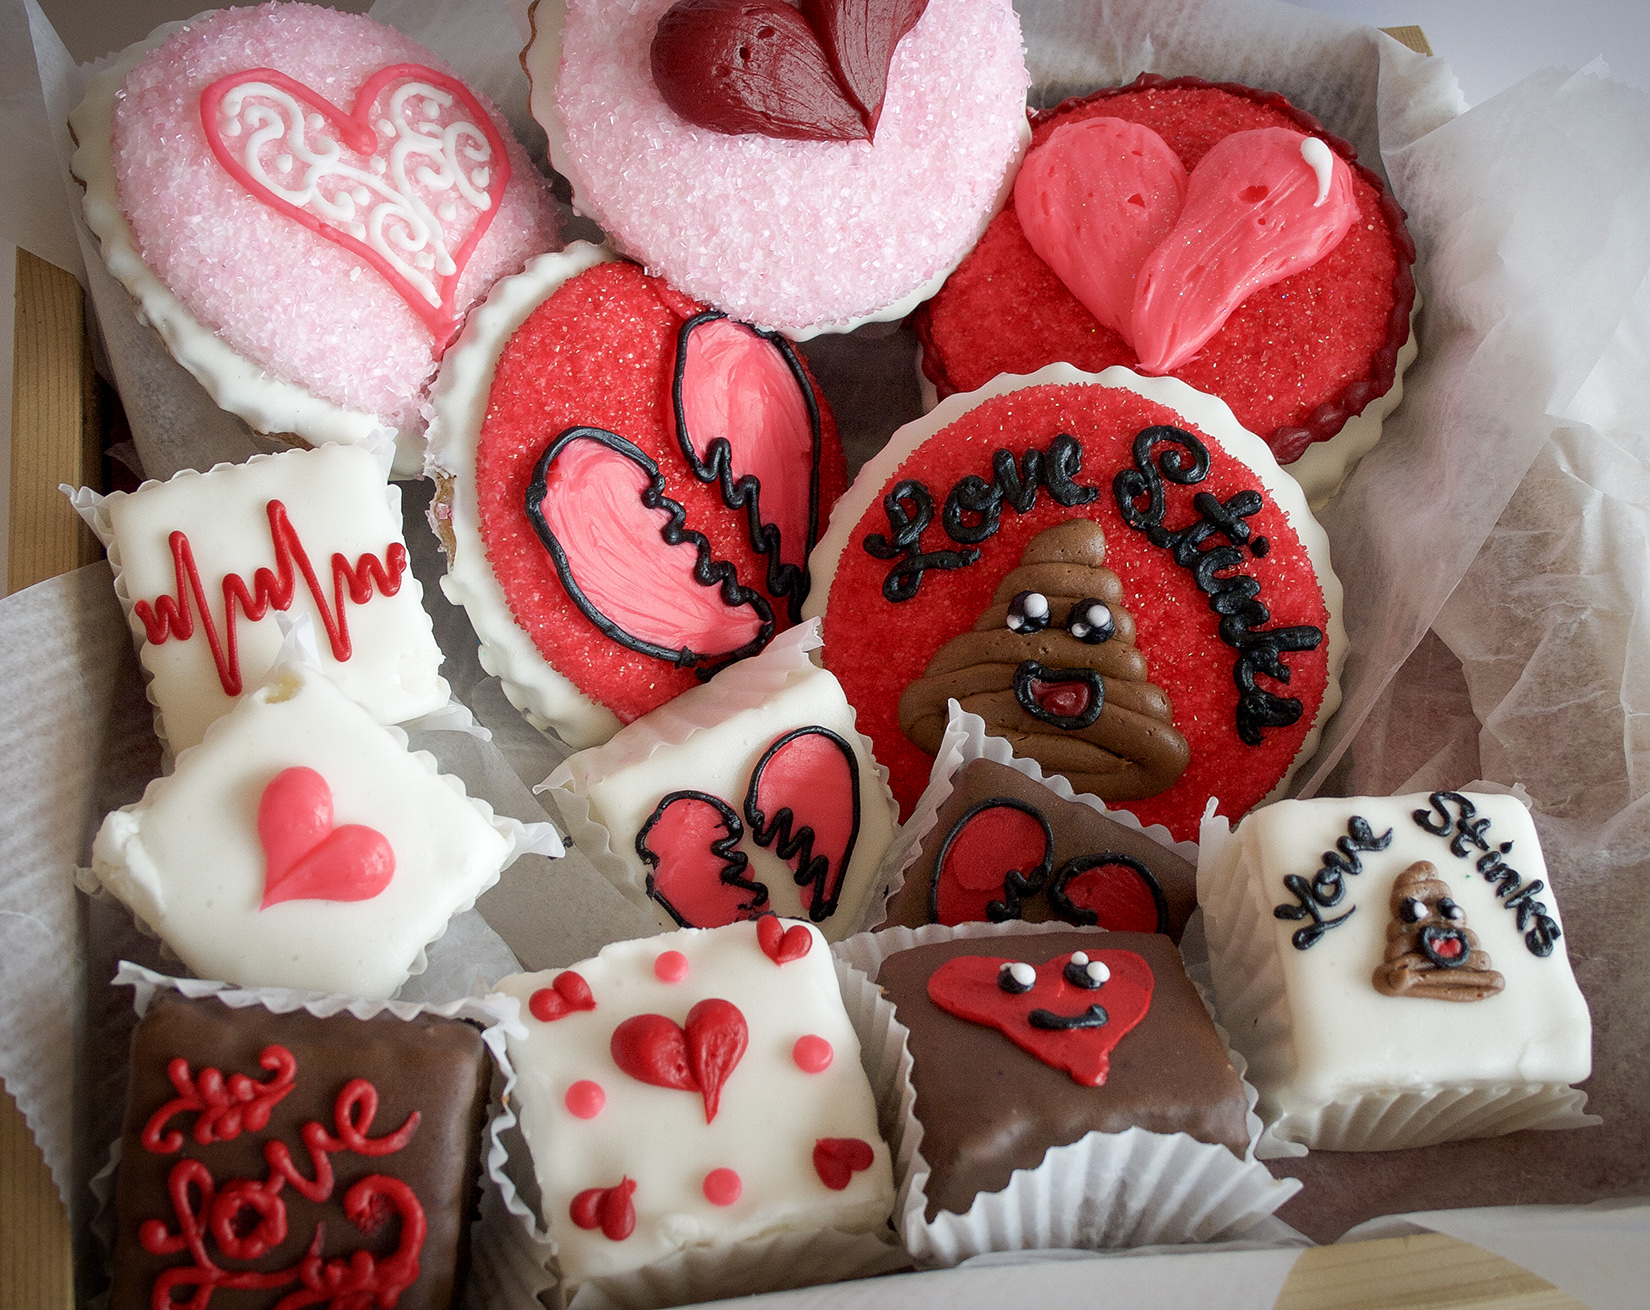 Valentines Day, Anti-Valentines Day or Single Awareness Day (SAD) - there is something for everyone at Three Brothers Bakery